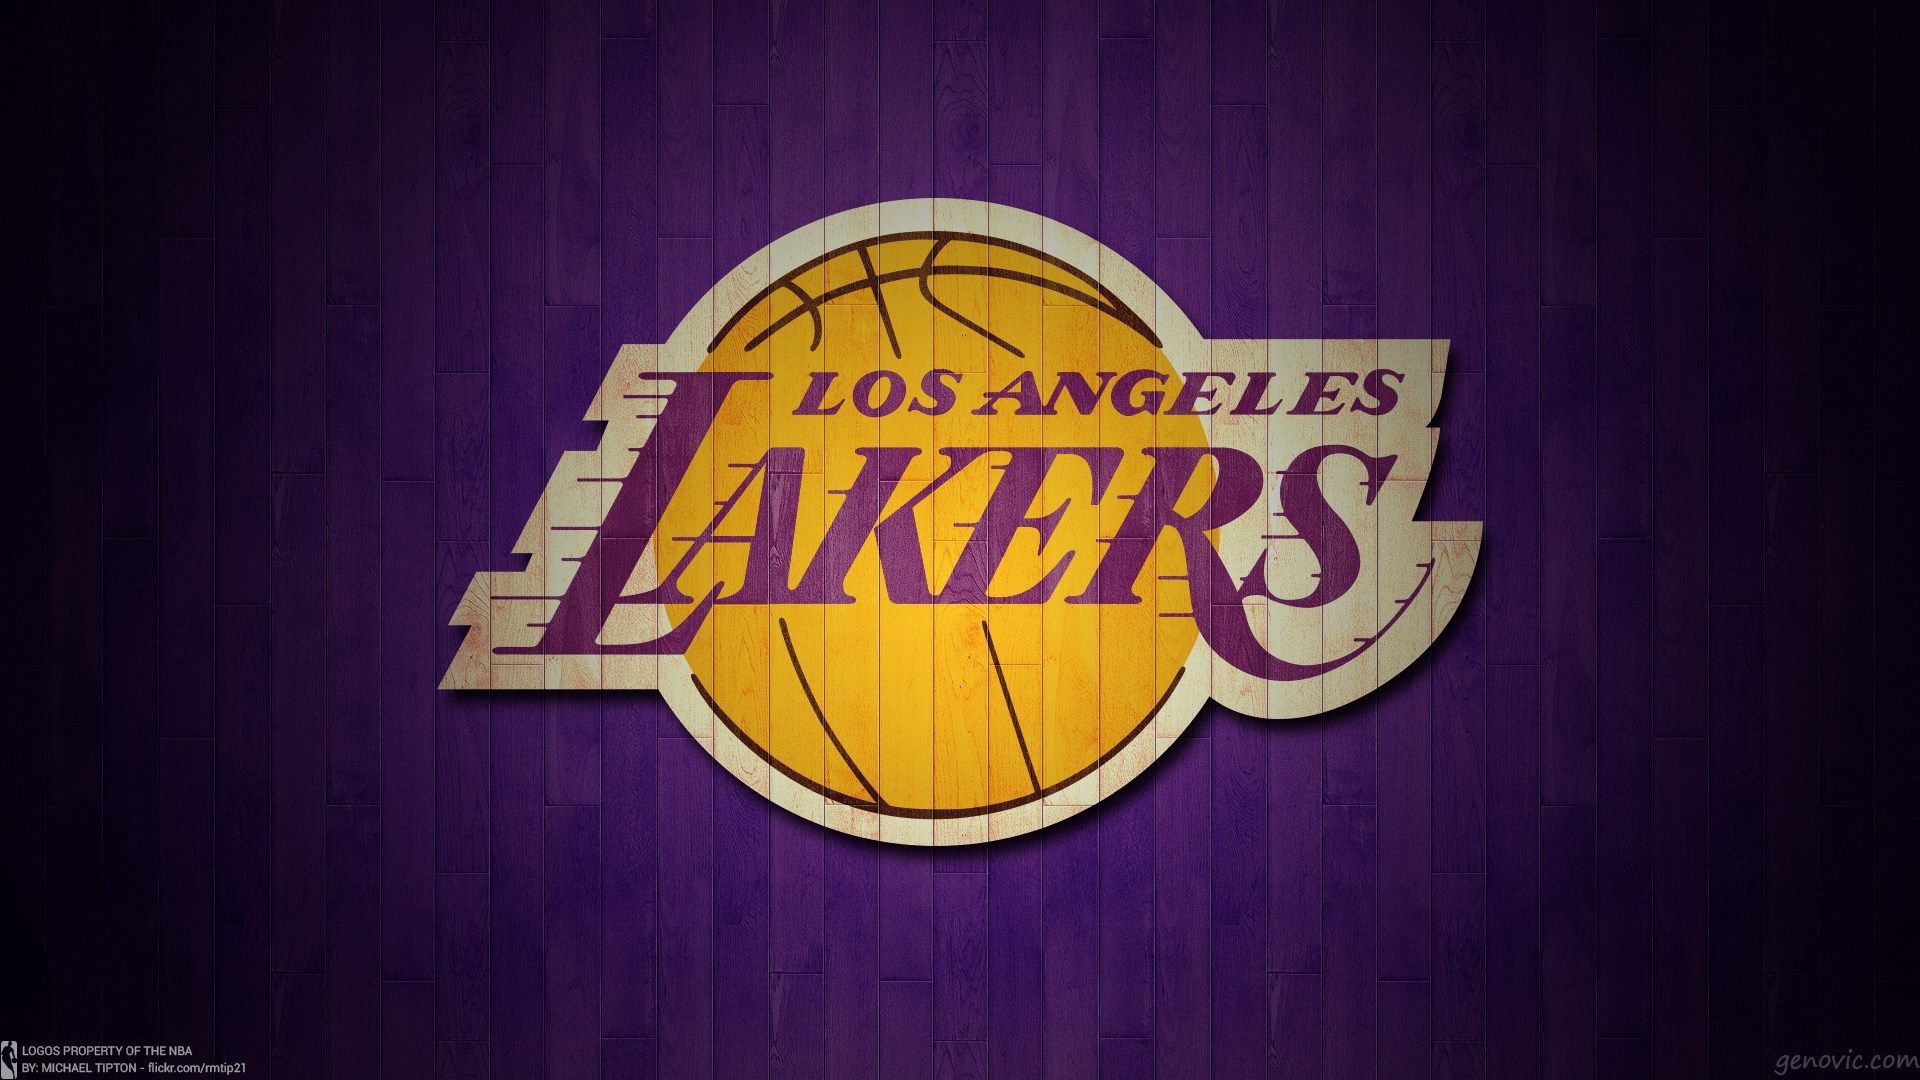 Los Angeles Lakers Image HD Wallpaper And